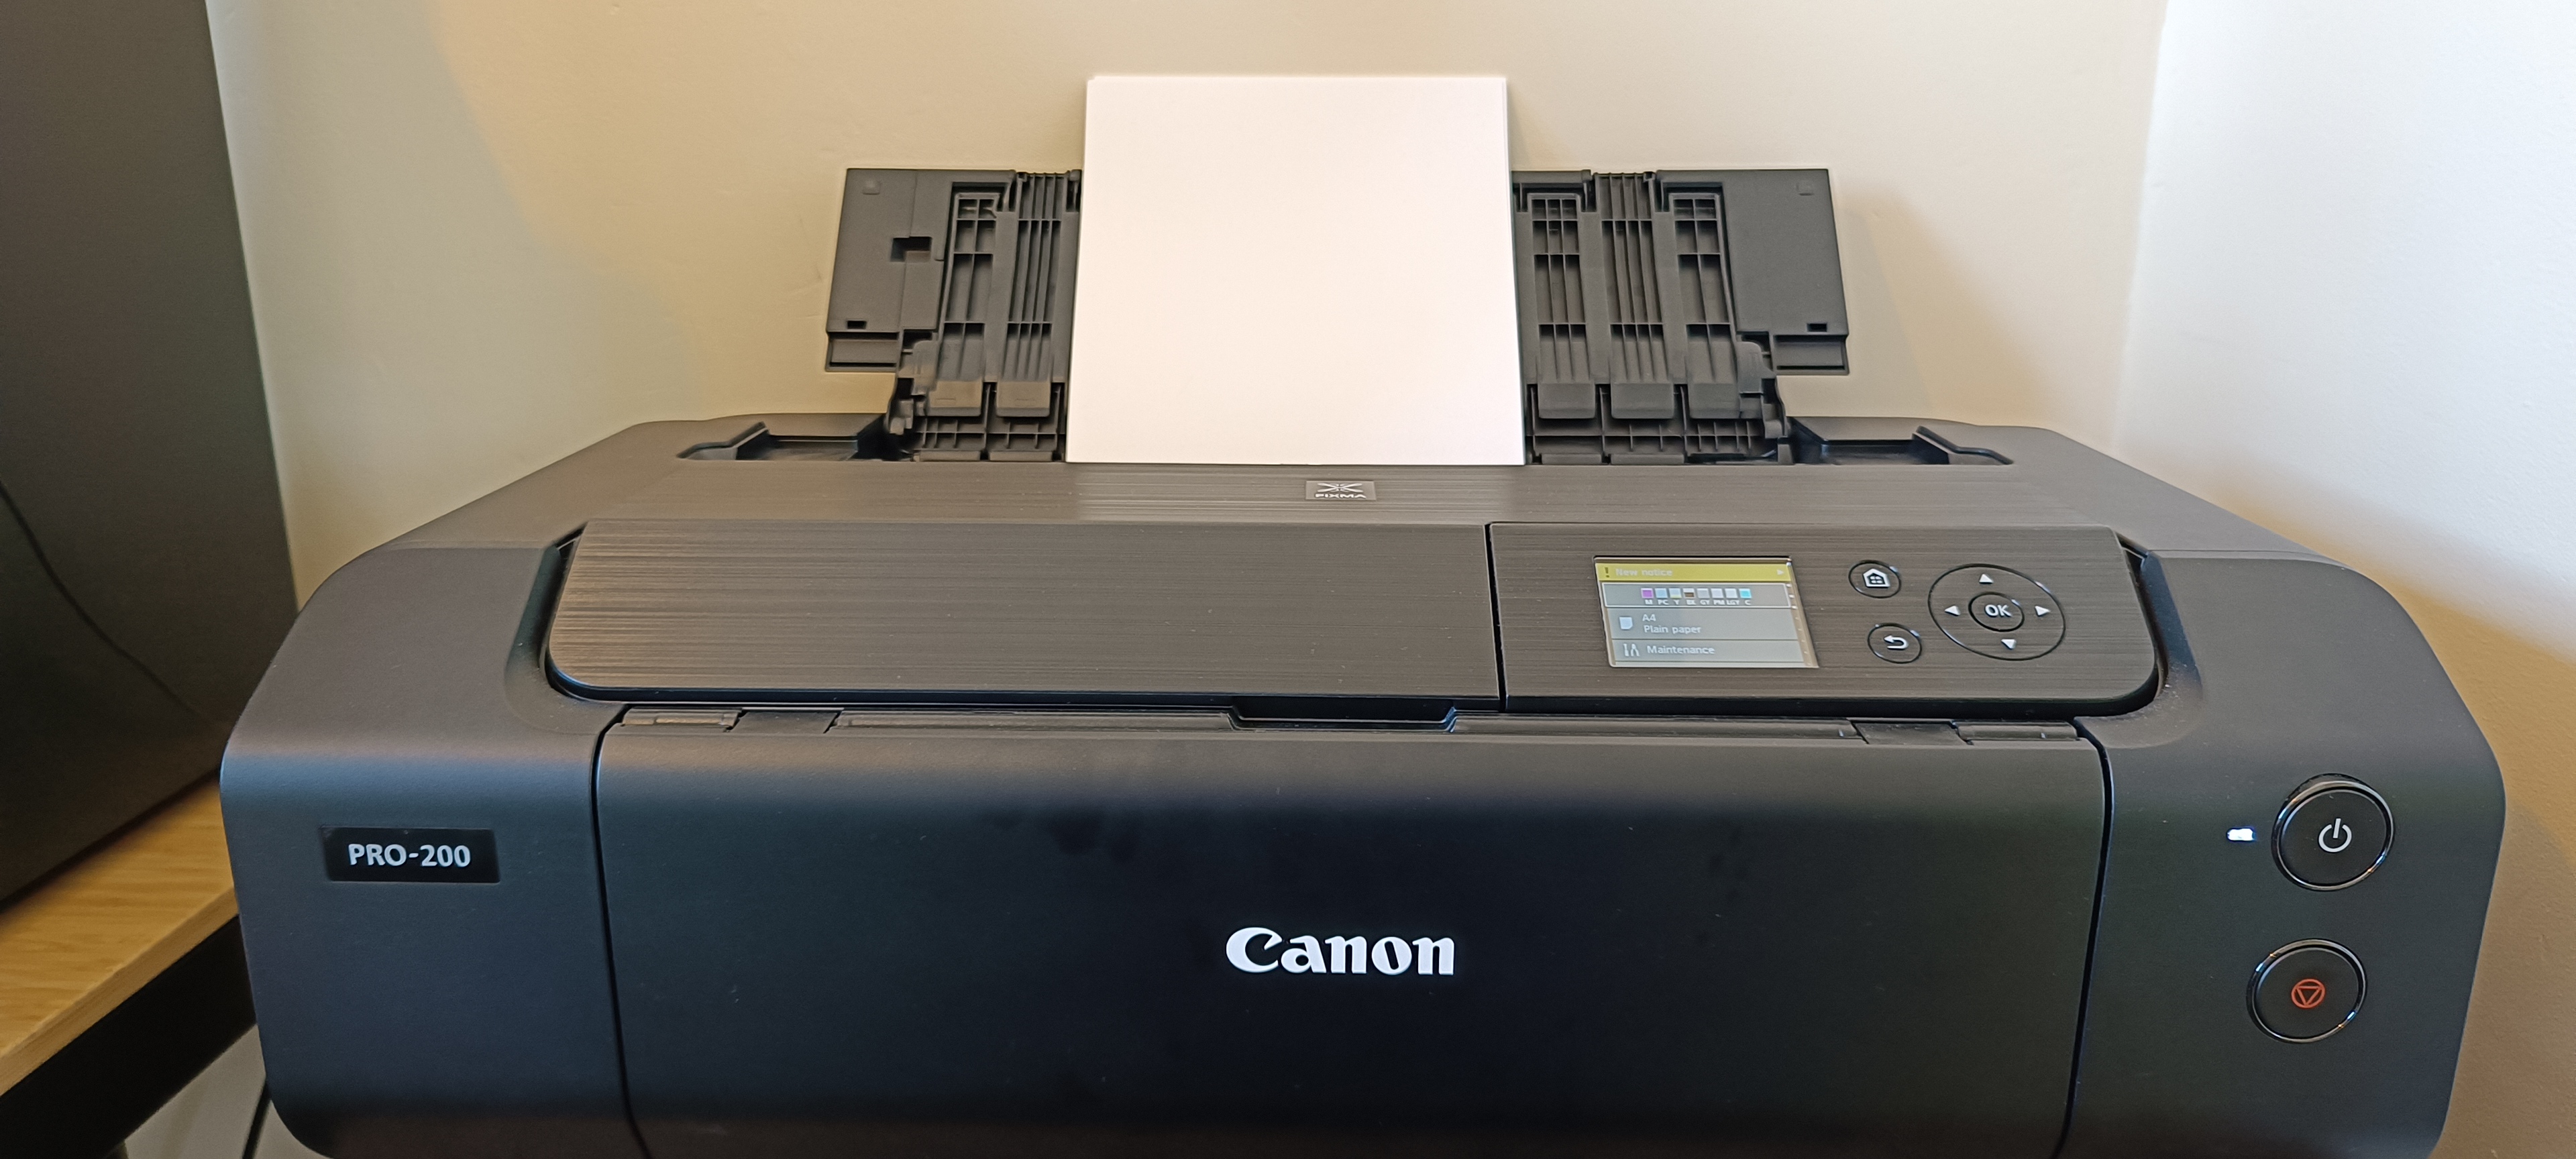 canon-pixma-pro-200-review-mighty-printer-produces-great-photos